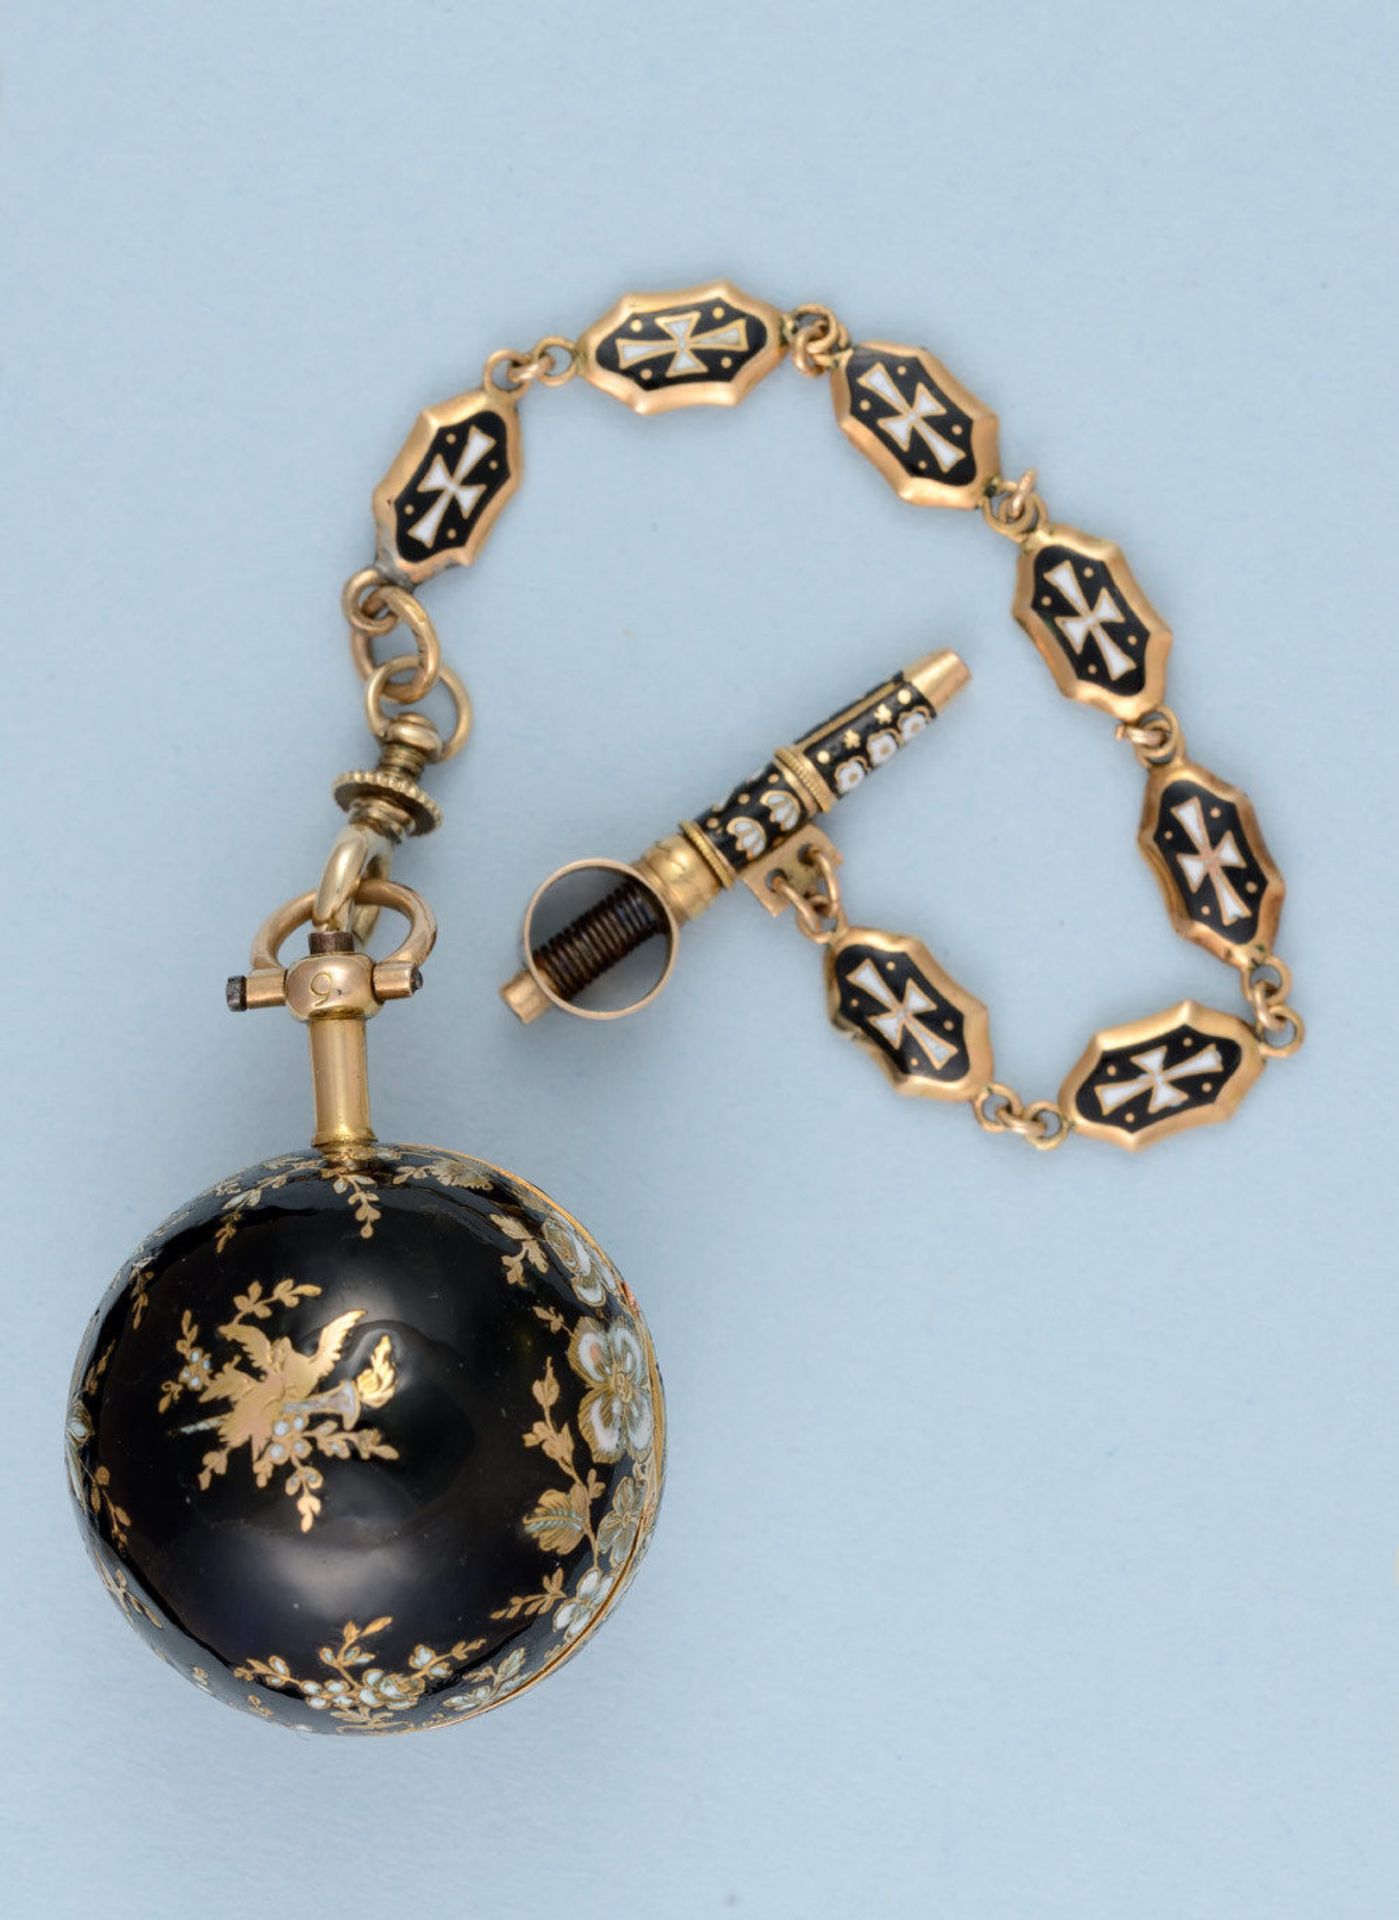 Gold and Enamel Verge Ball Watch and Chain - Image 2 of 7